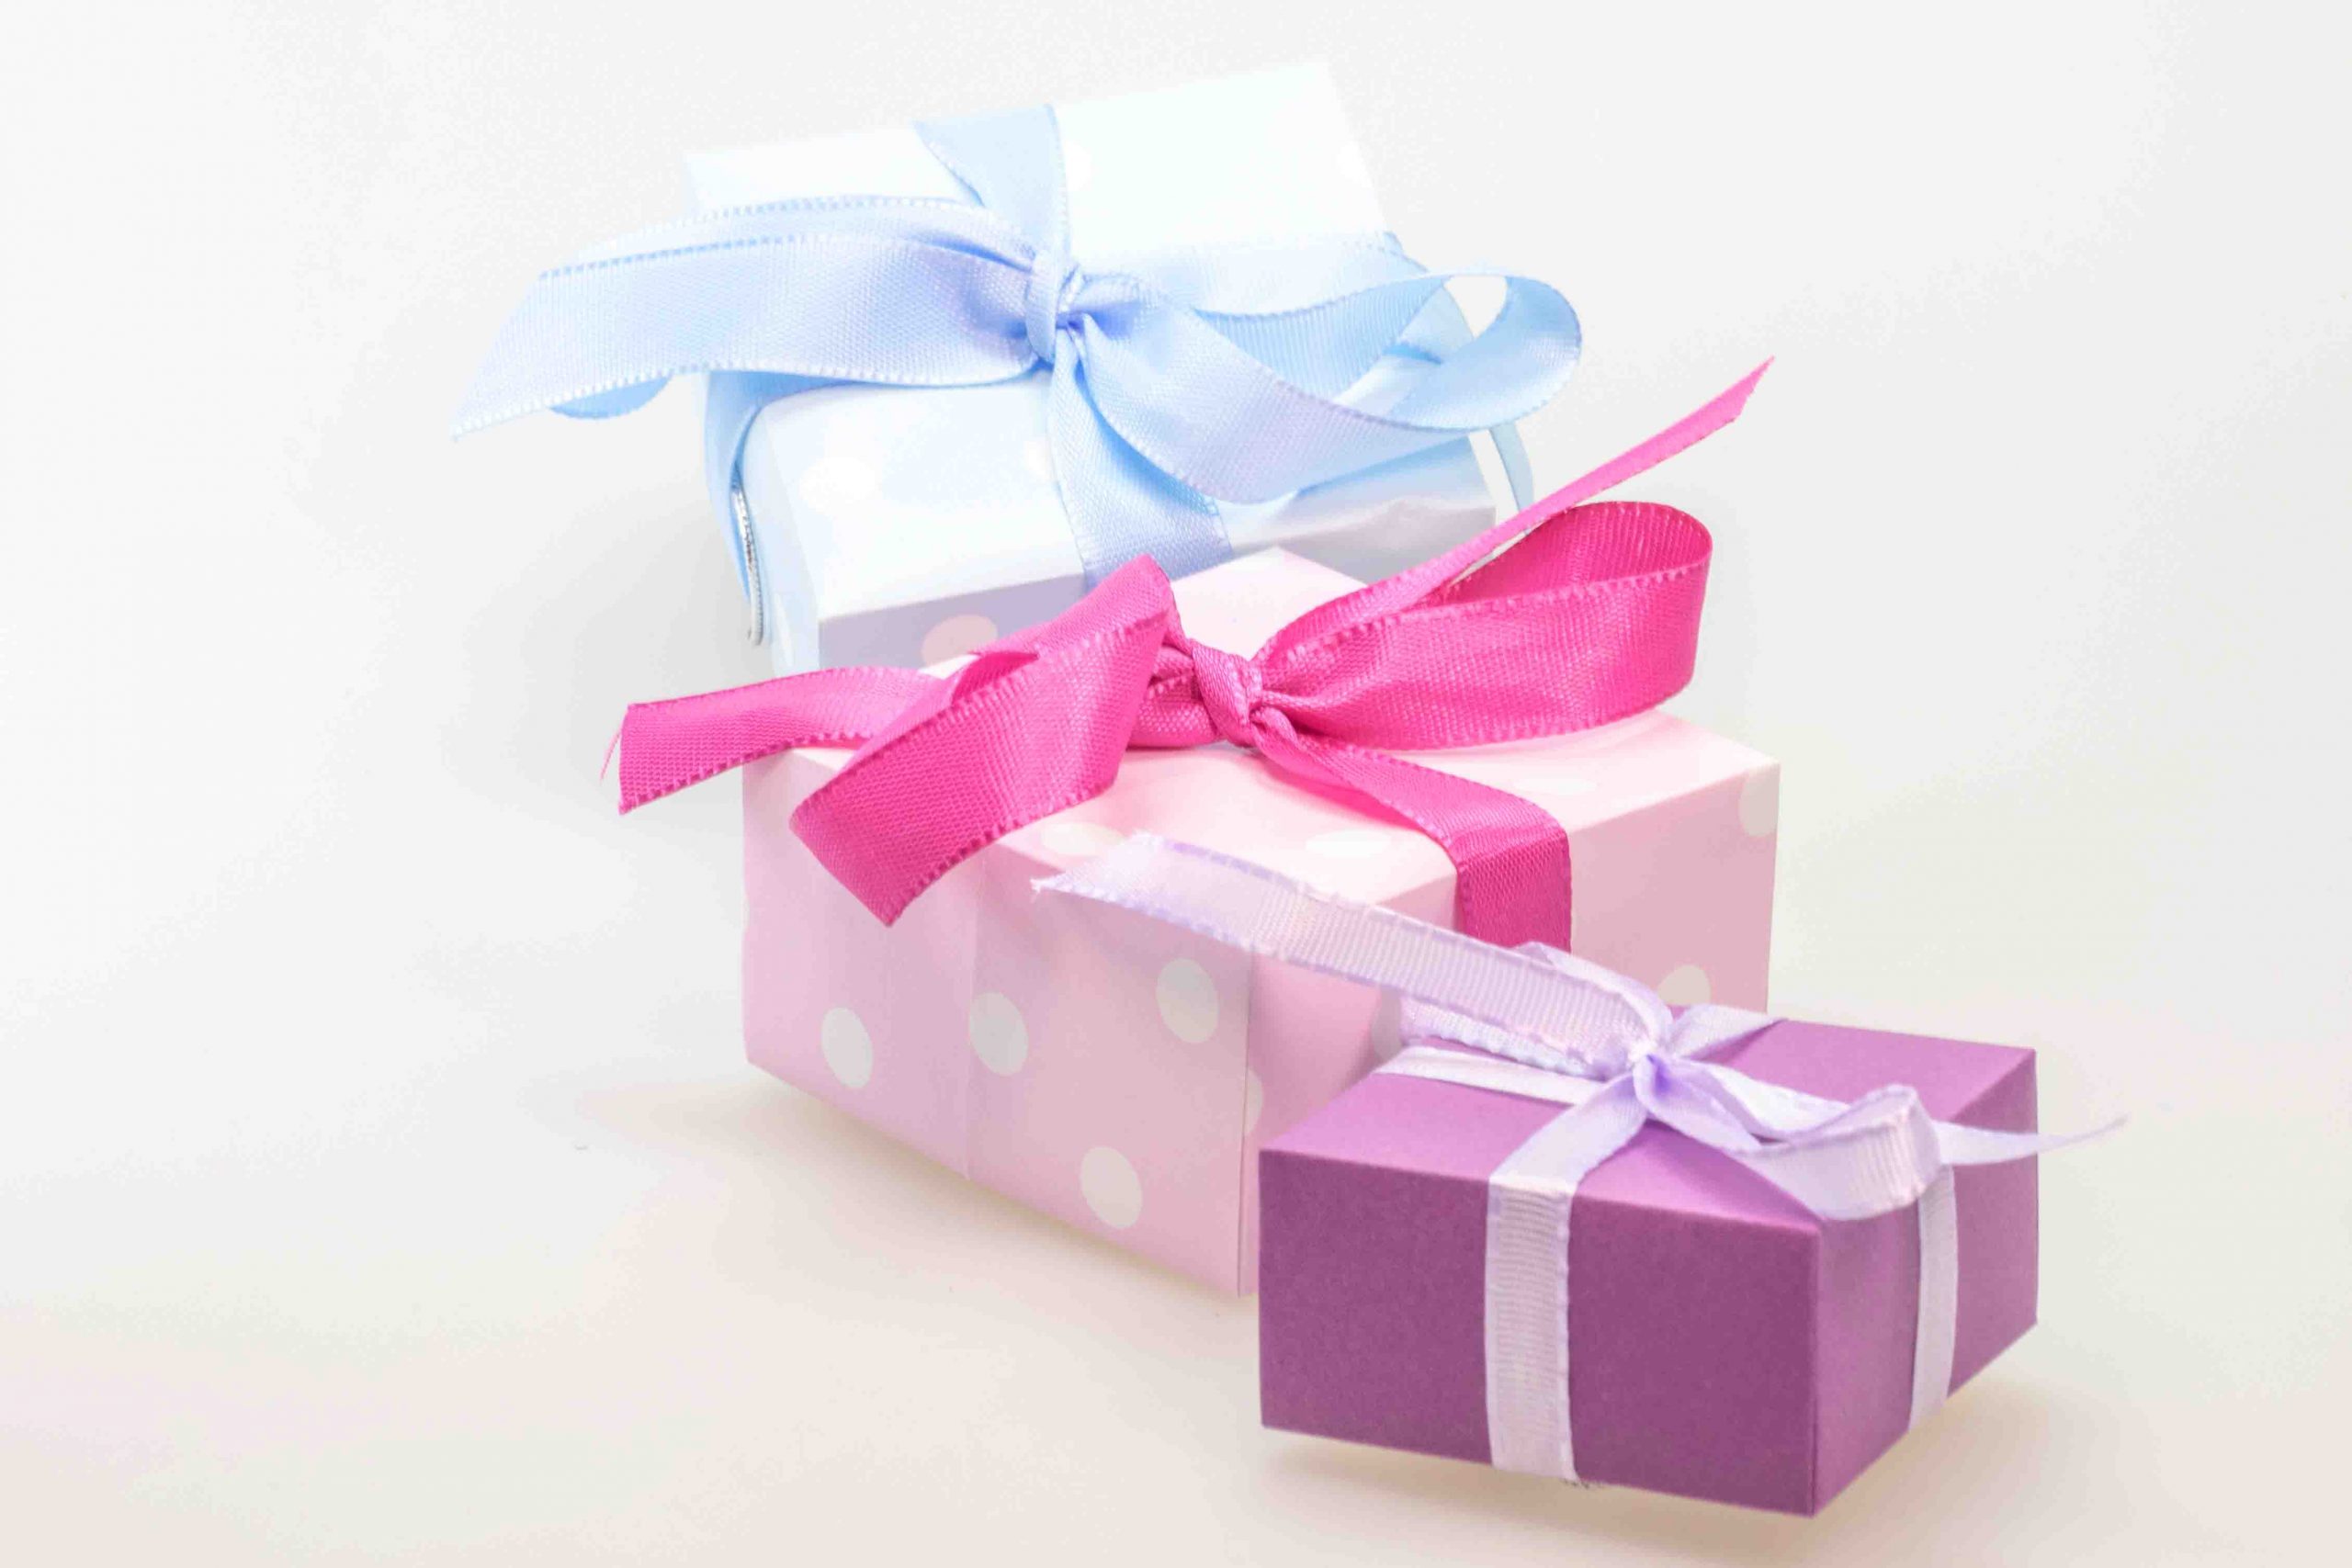 How to Find a Perfect Baby Shower Gift